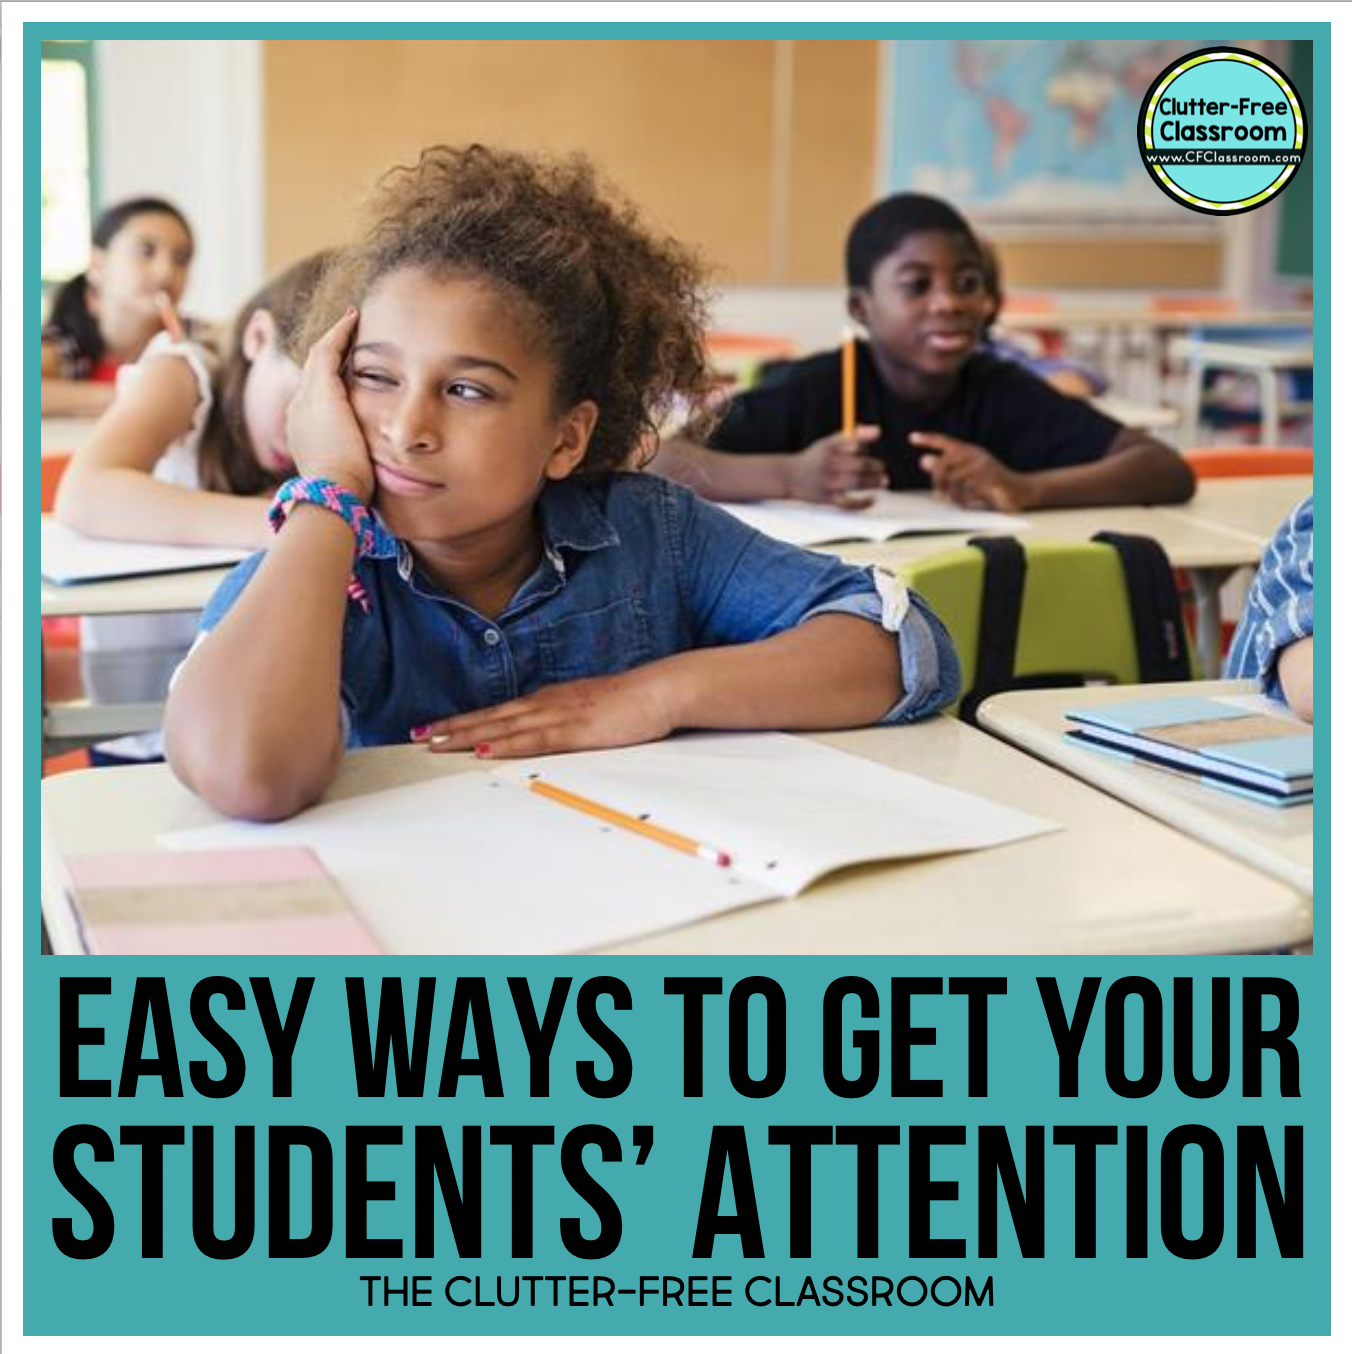 Every classroom needs attentions getters or grabbers to promote classroom management. These strategies could be catchy phrases or non verbal. Create an anchor chart for your kids so they remember the procedures and routines.